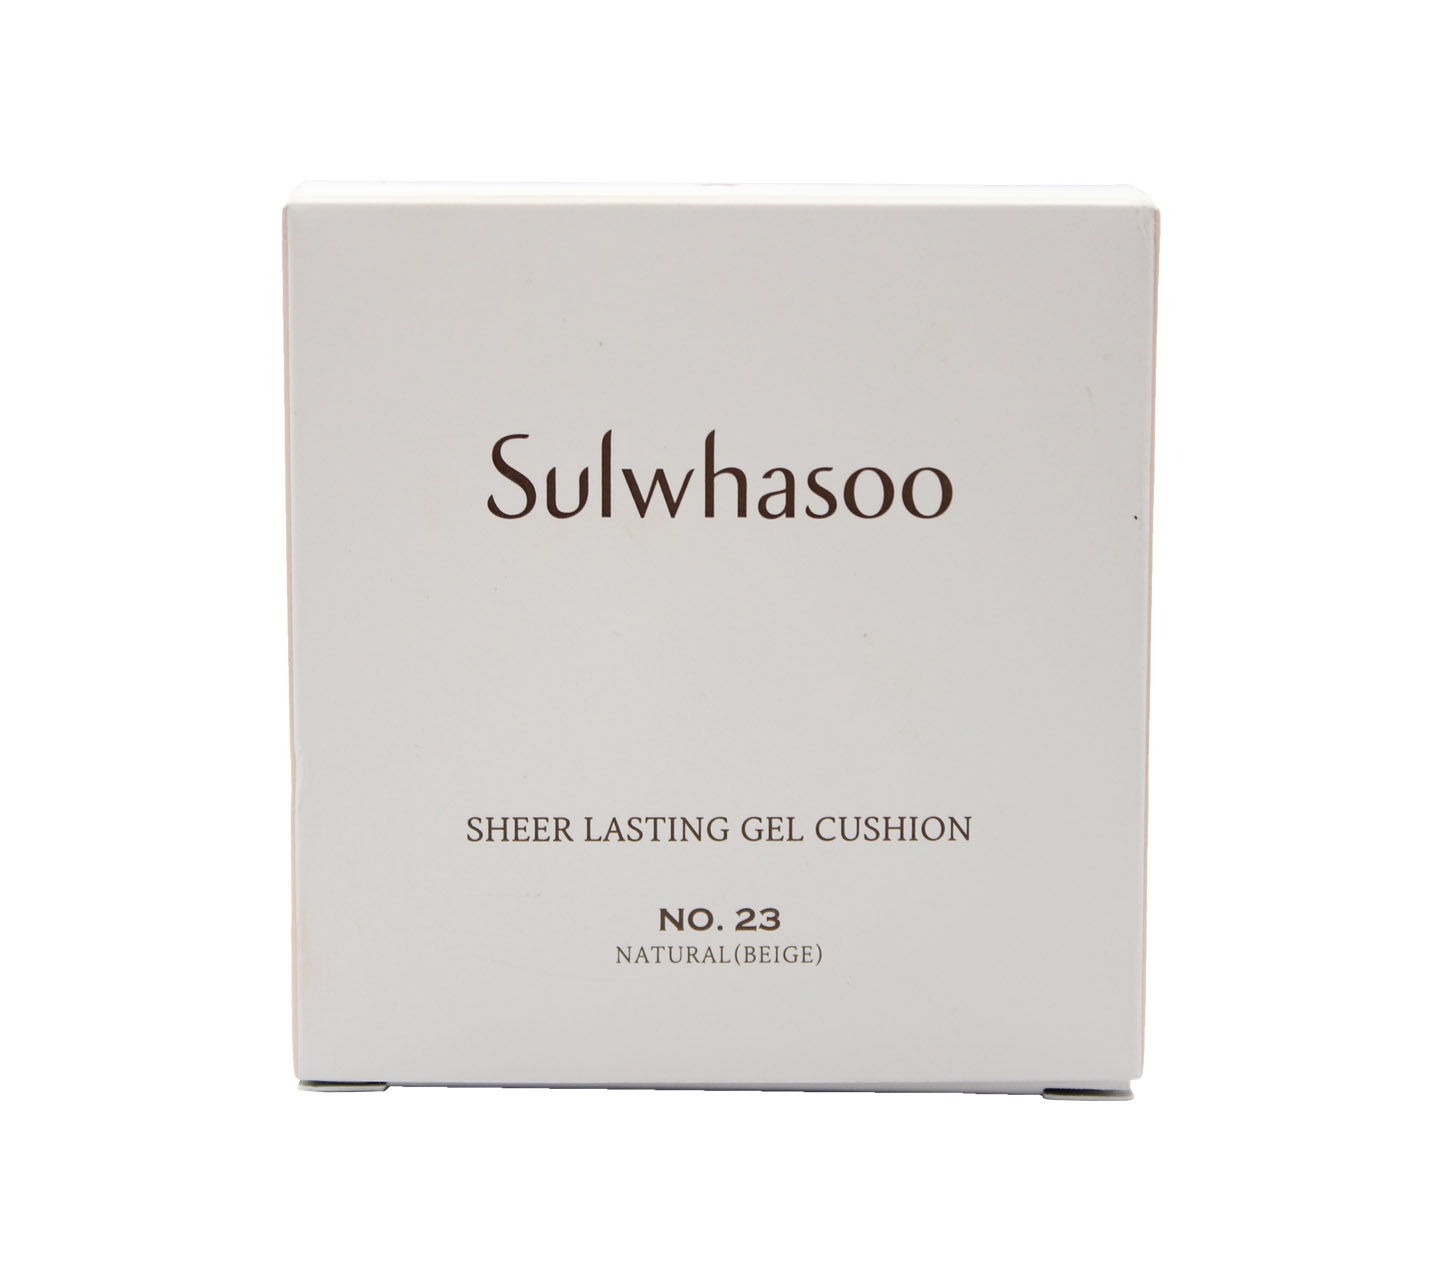 Sulwhasoo Sheer Lasting Gel Cushion No.23 Natural (Beige) Faces